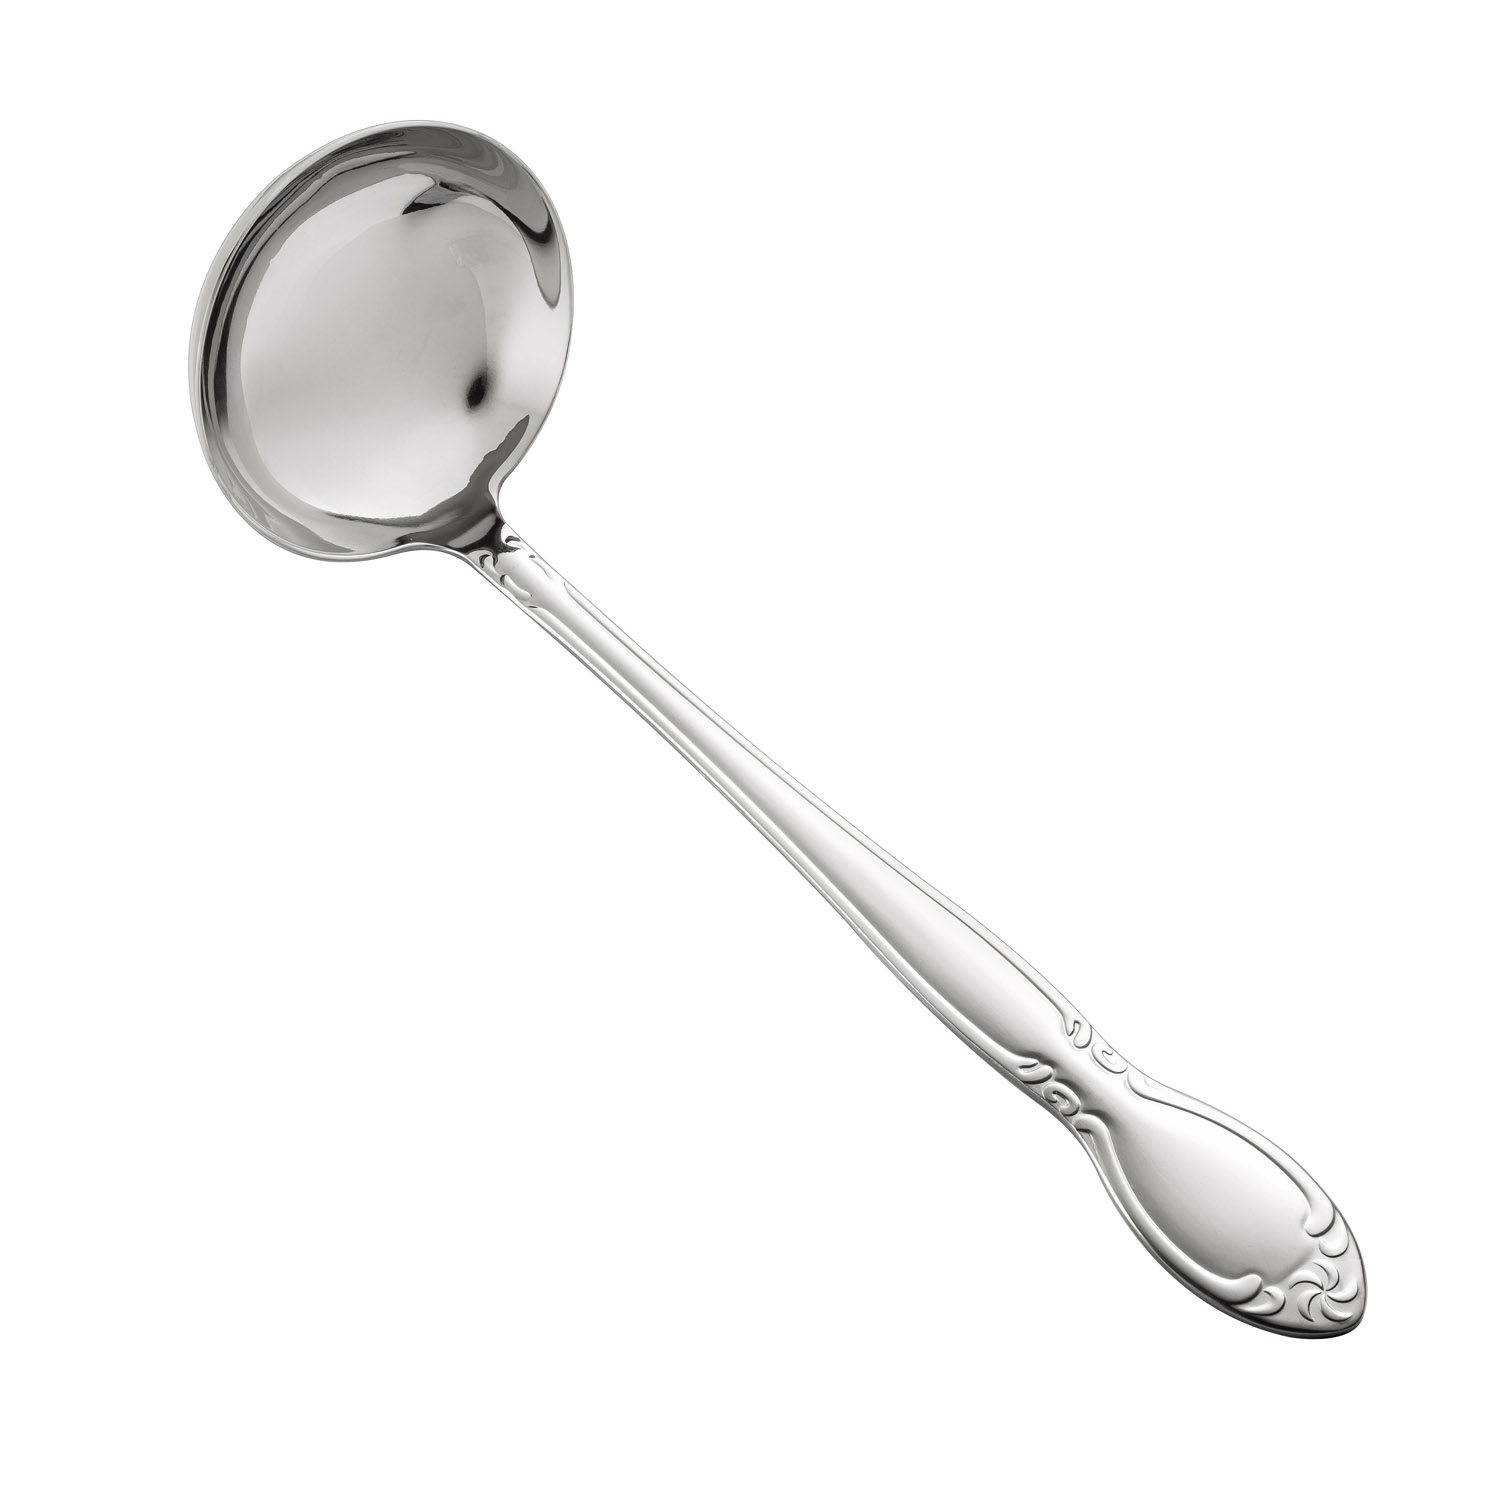 CAC China 3023-38 Louvre Ladle, Extra Heavy Weight 18/0, 4 oz., 11-1/2"